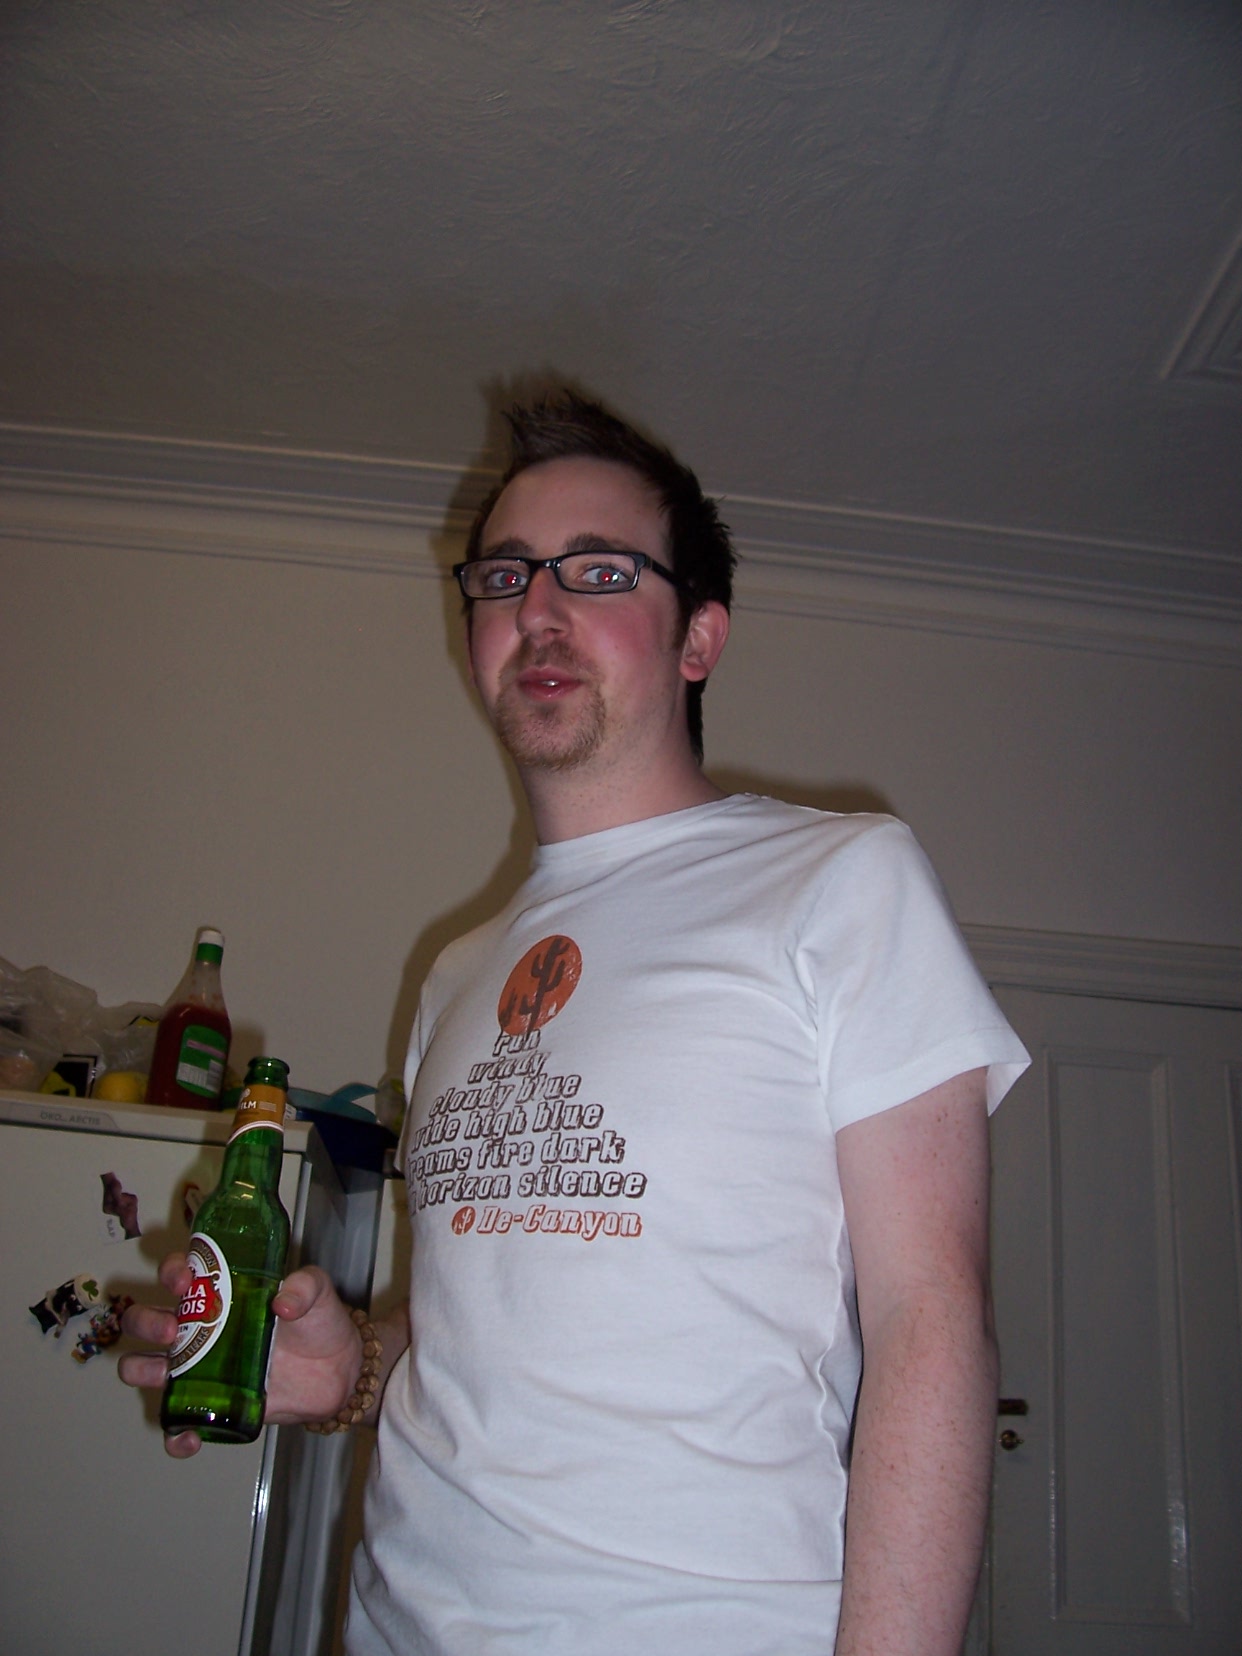 a man holding onto some beer bottles while wearing a t - shirt